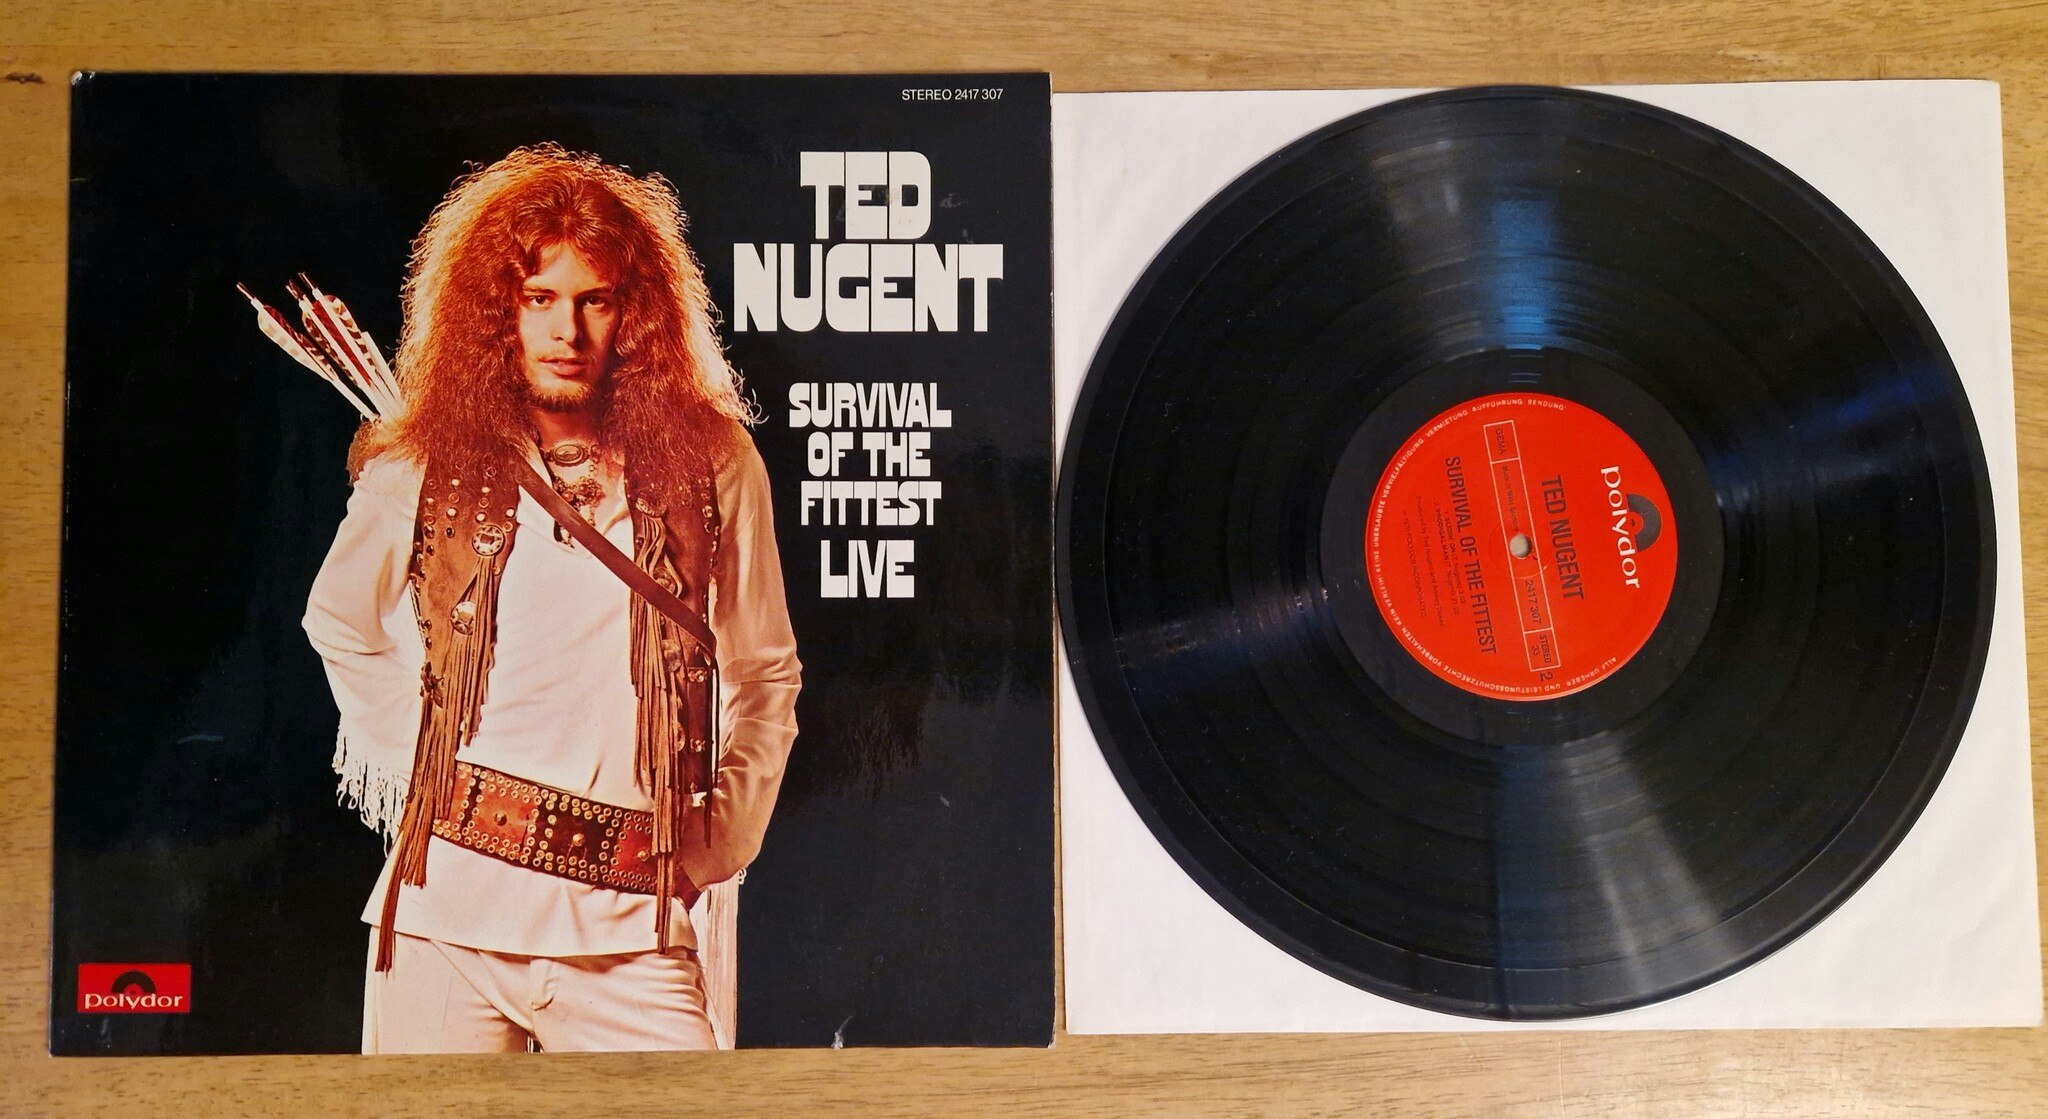 Ted Nugent, Survival of the fittest. Vinyl LP